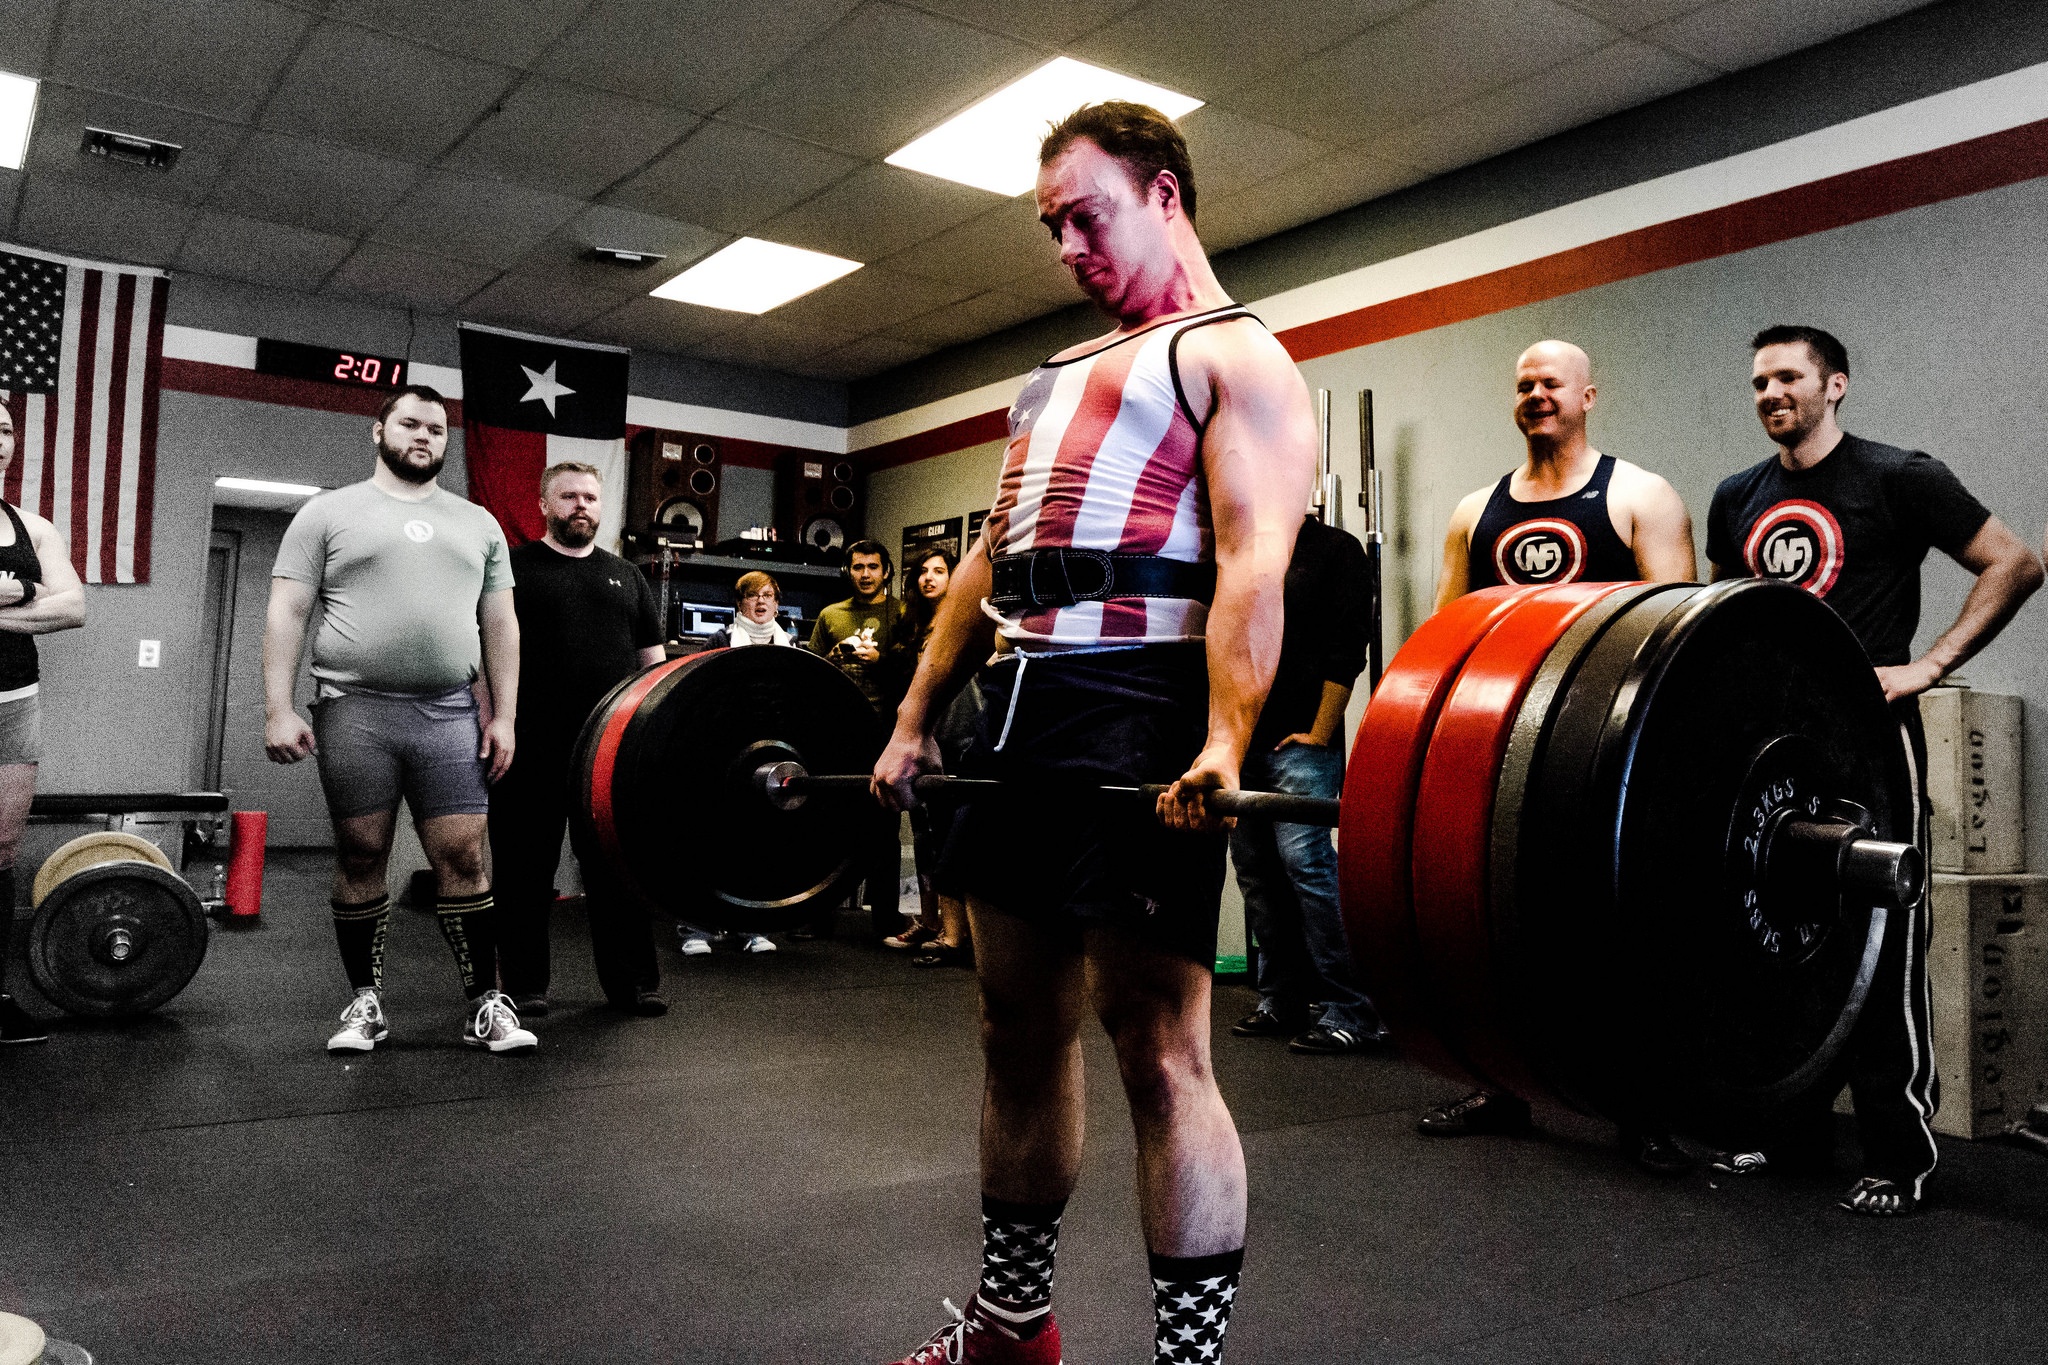 This is one of my favorite warmup movements before I sumo deadlift. I